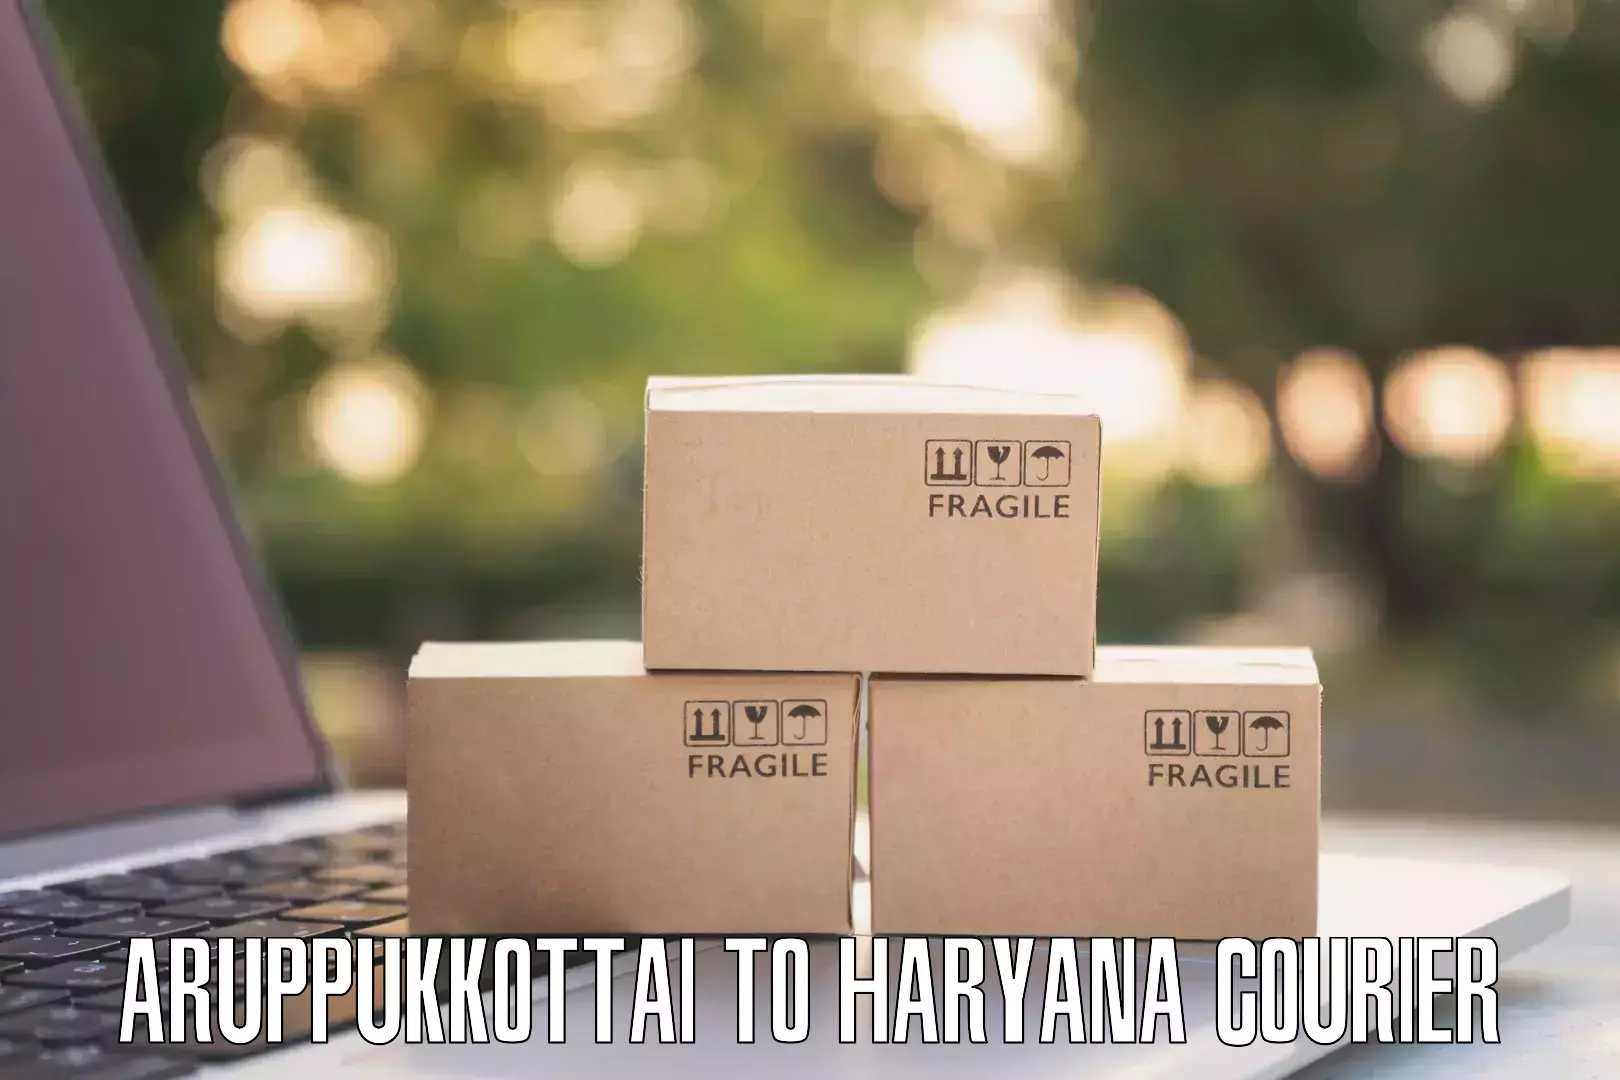 Global courier networks Aruppukkottai to Jind